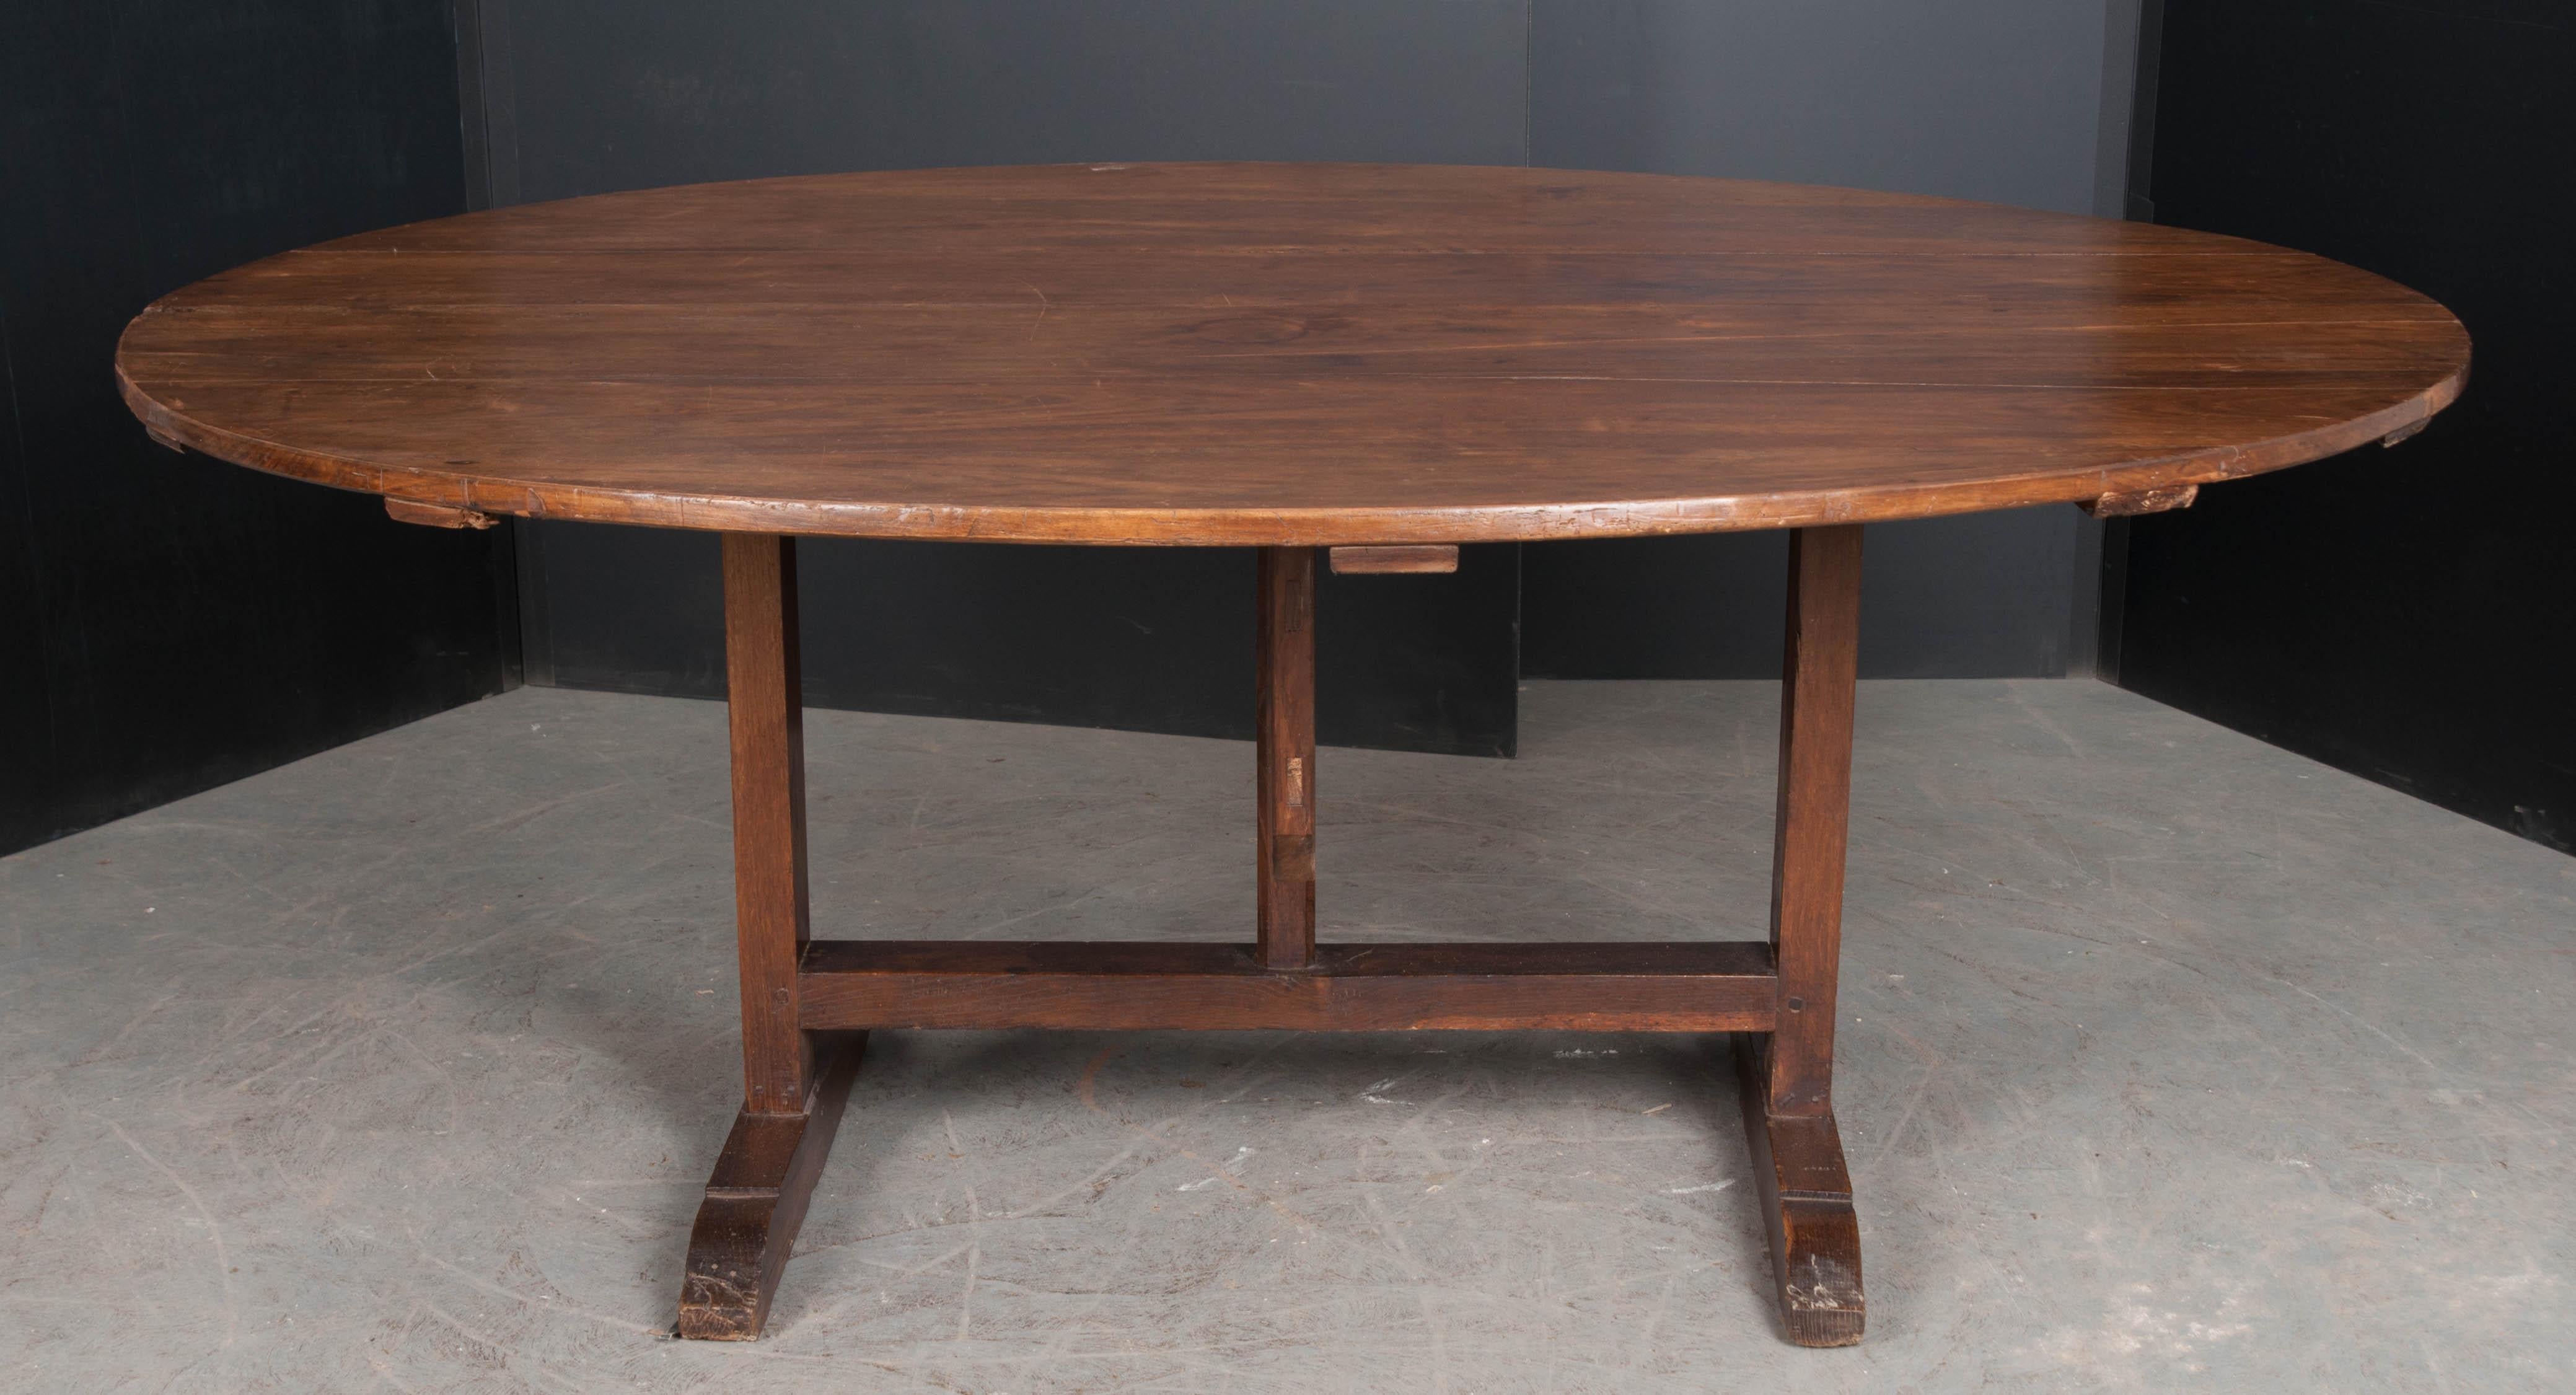 This walnut wine tasting table was made in France, circa 1880. These tilting tables are fun antiques for both the wine enthusiast and adversary alike. Thoughtfully designed for narrow-corridor wine cellars, they have the ability to tilt into a